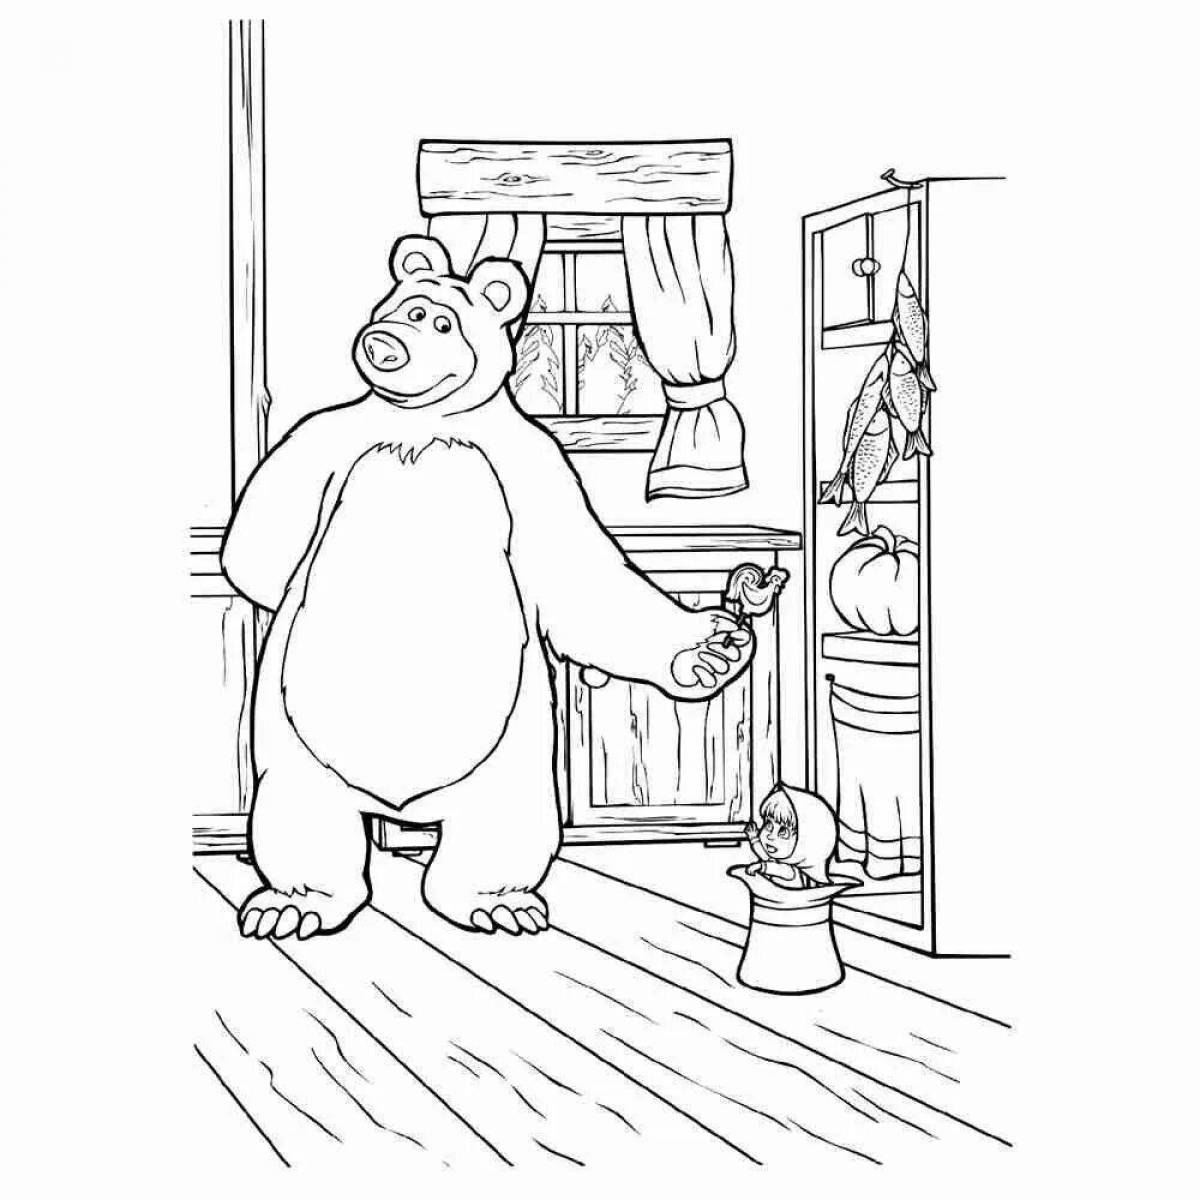 Coloring page cozy teddy bear from masha and bear